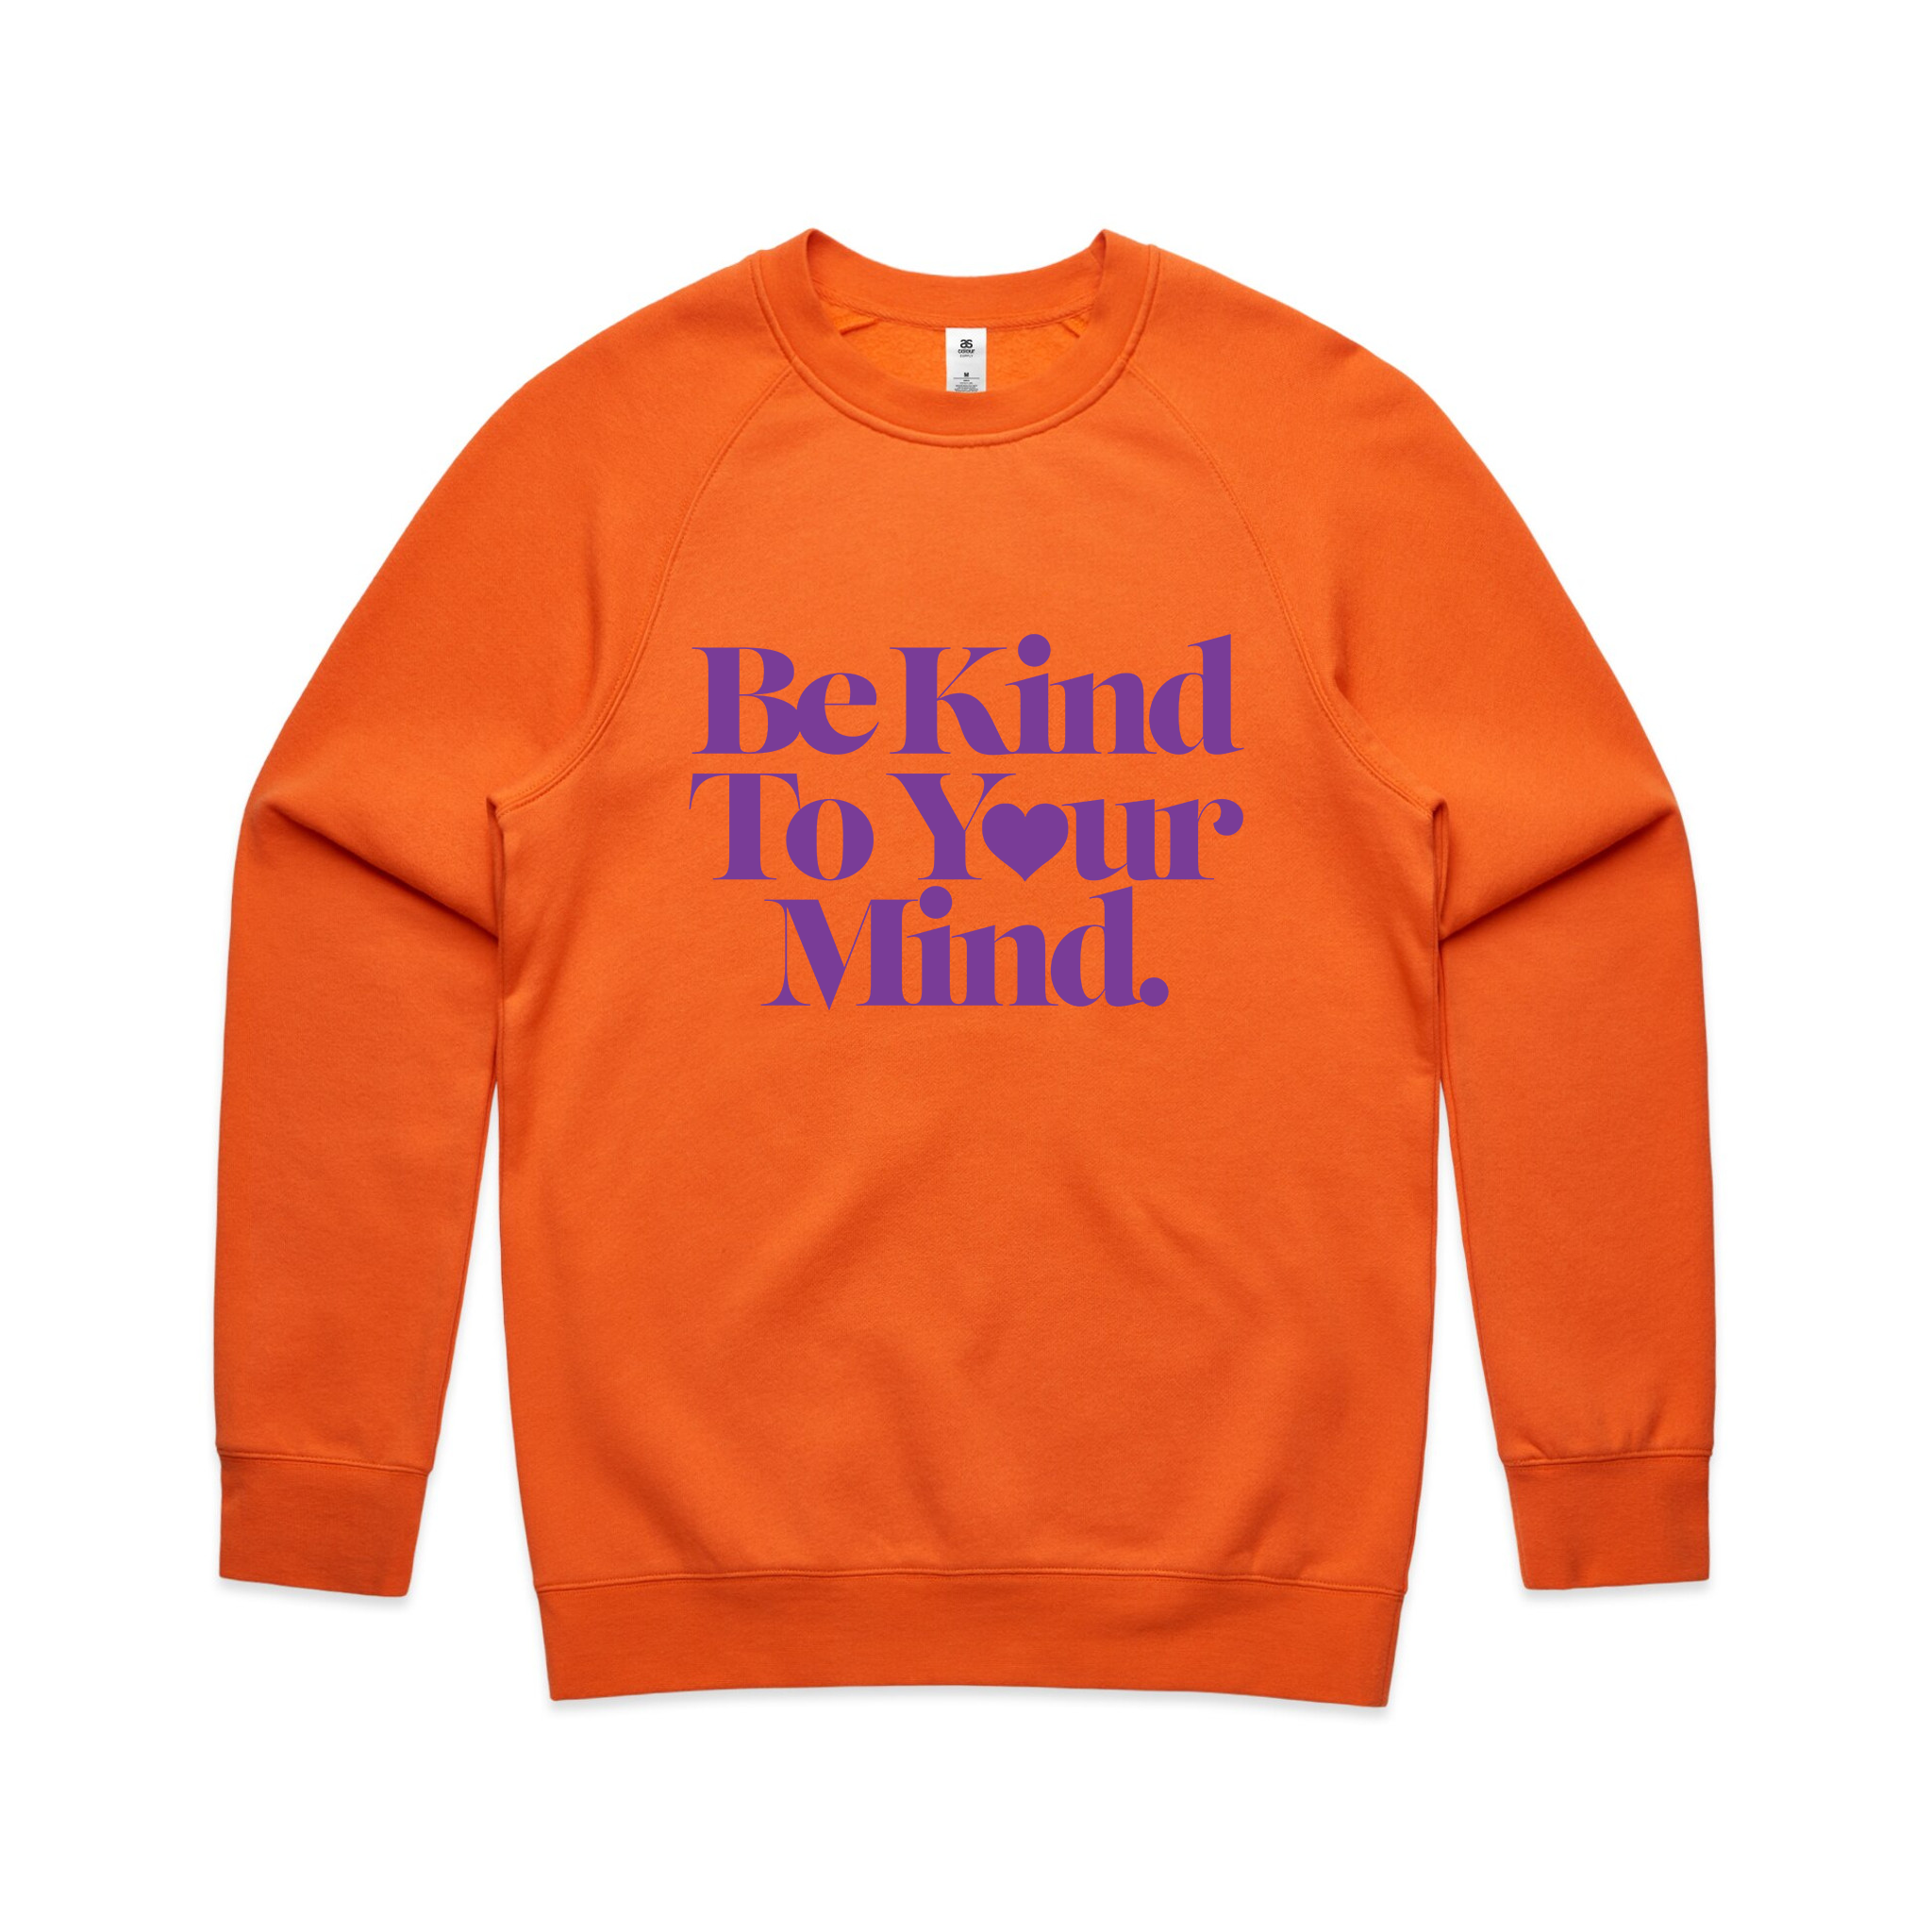 Be Kind To Your Mind Jumper